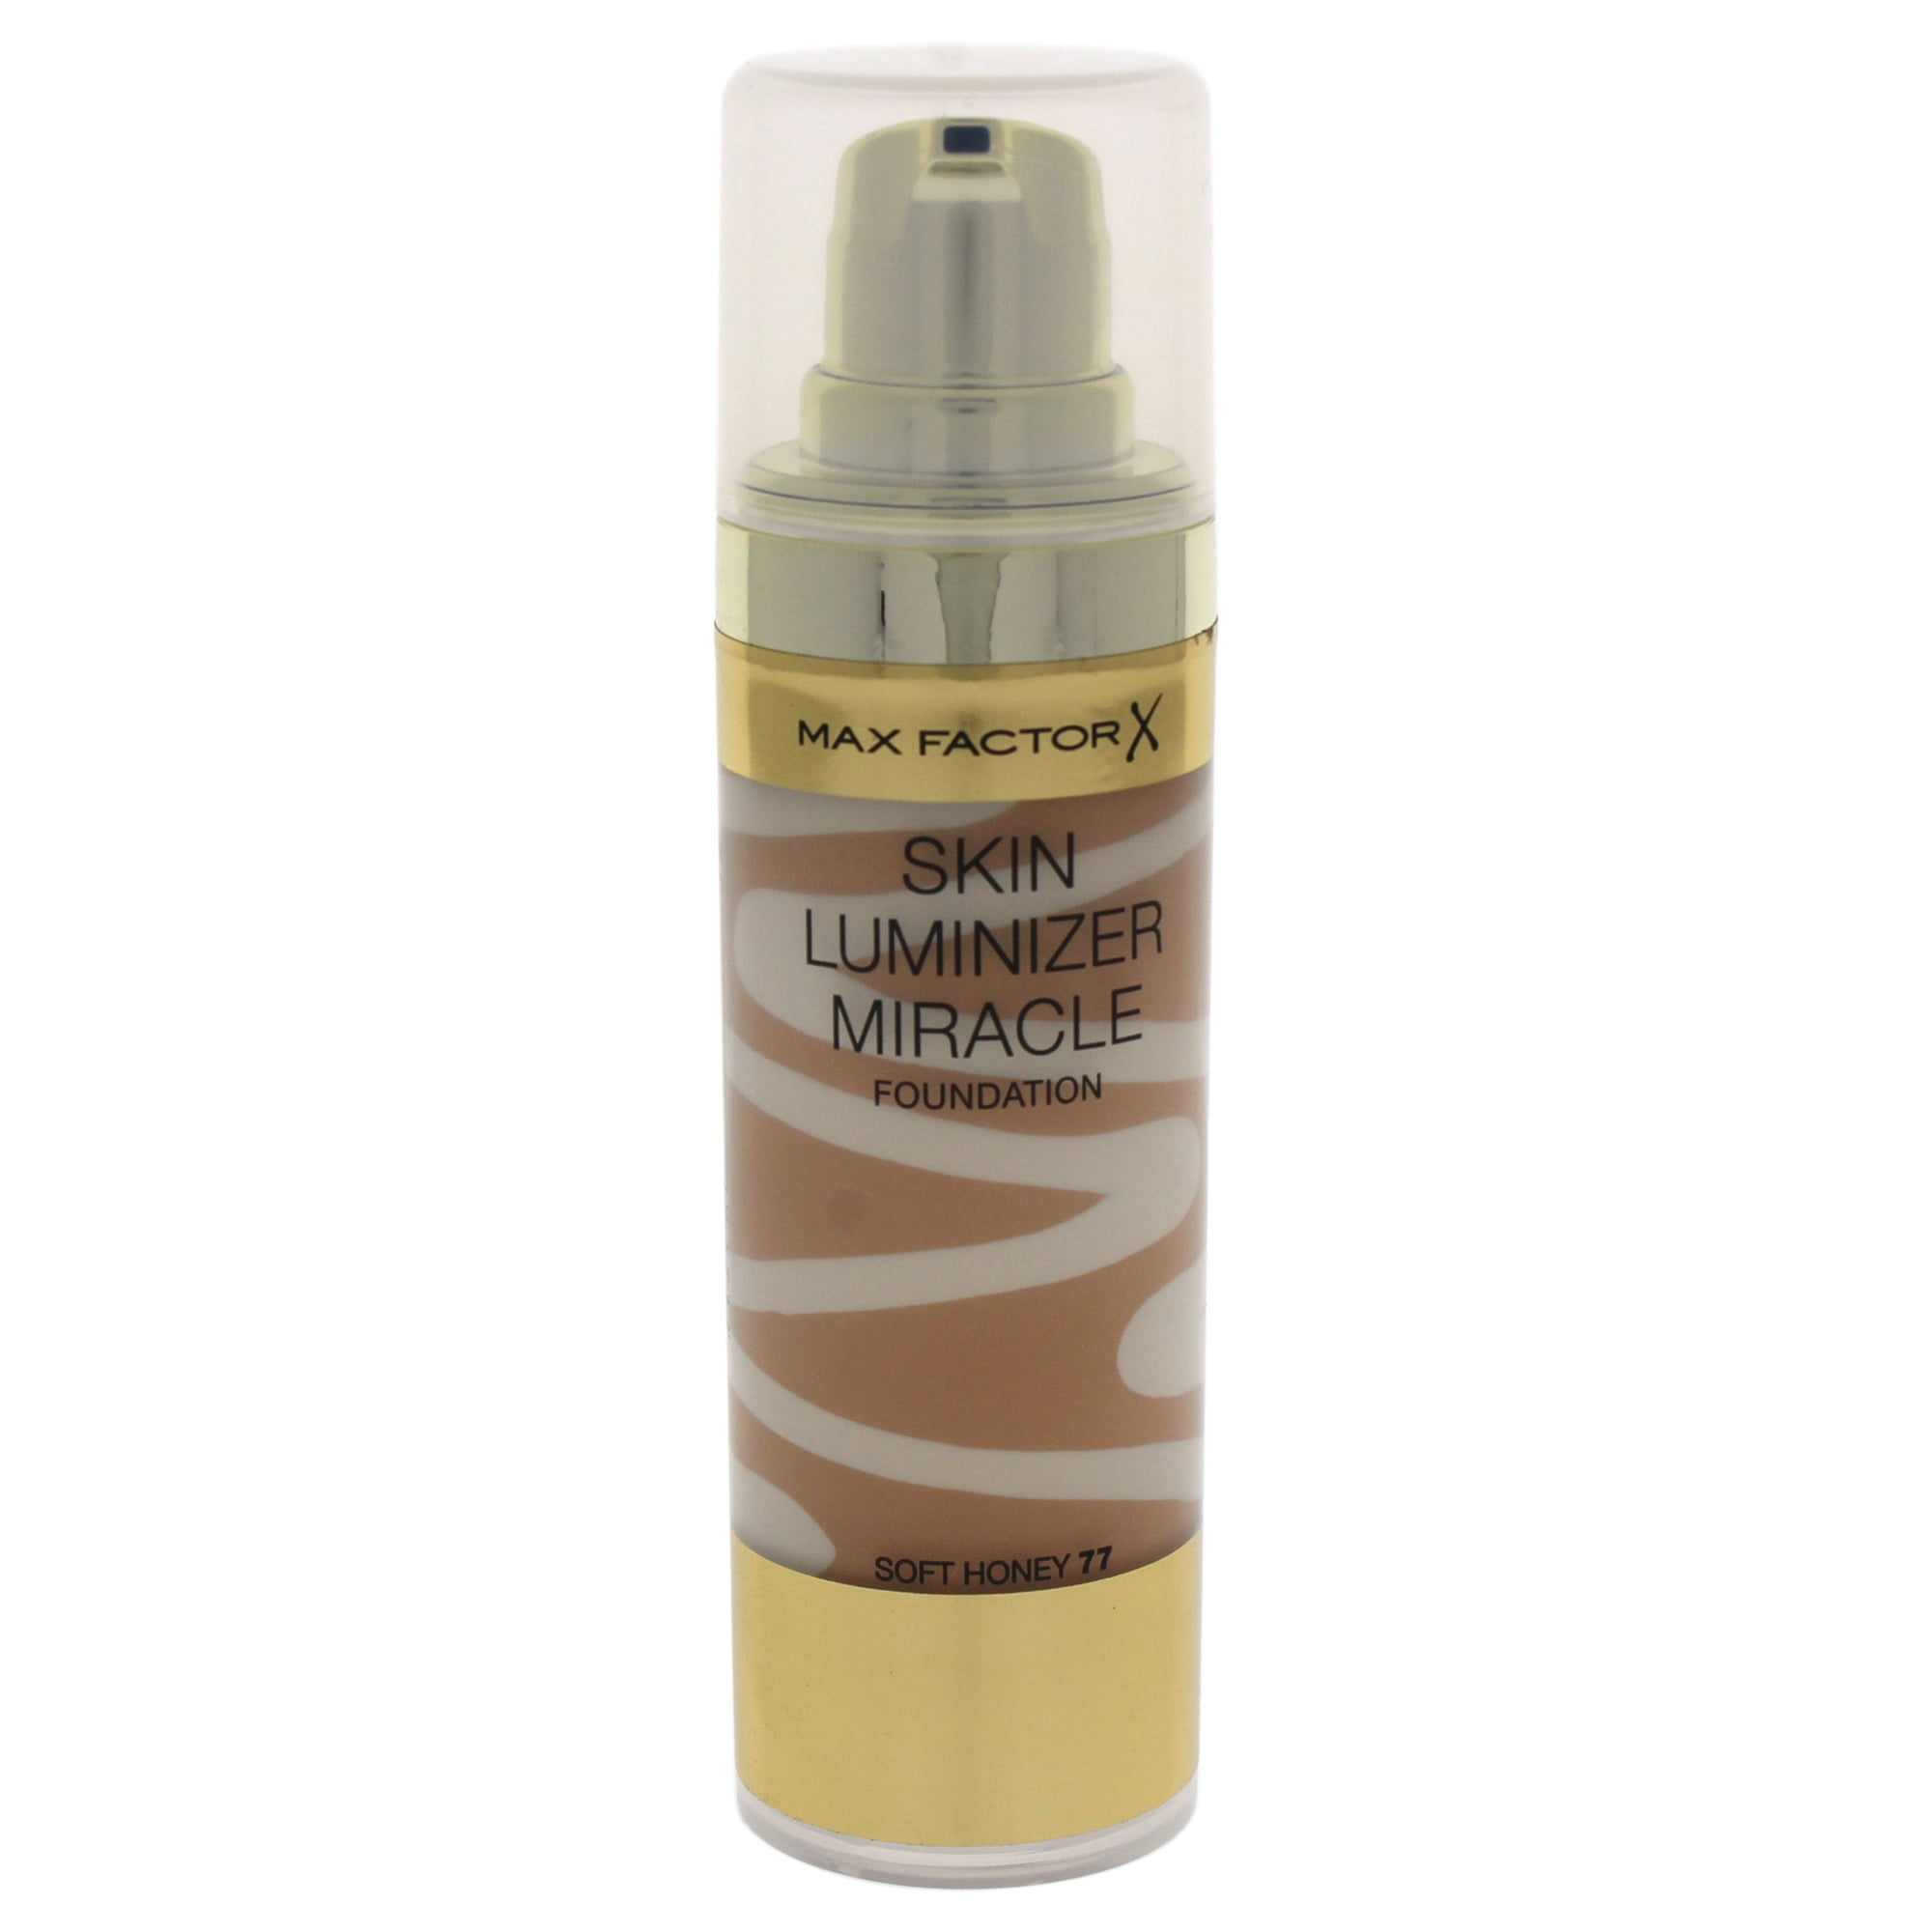 Skin Luminizer Miracle Foundation - Factor oz Max by 77 Foundation for Women Soft - 1 Honey 